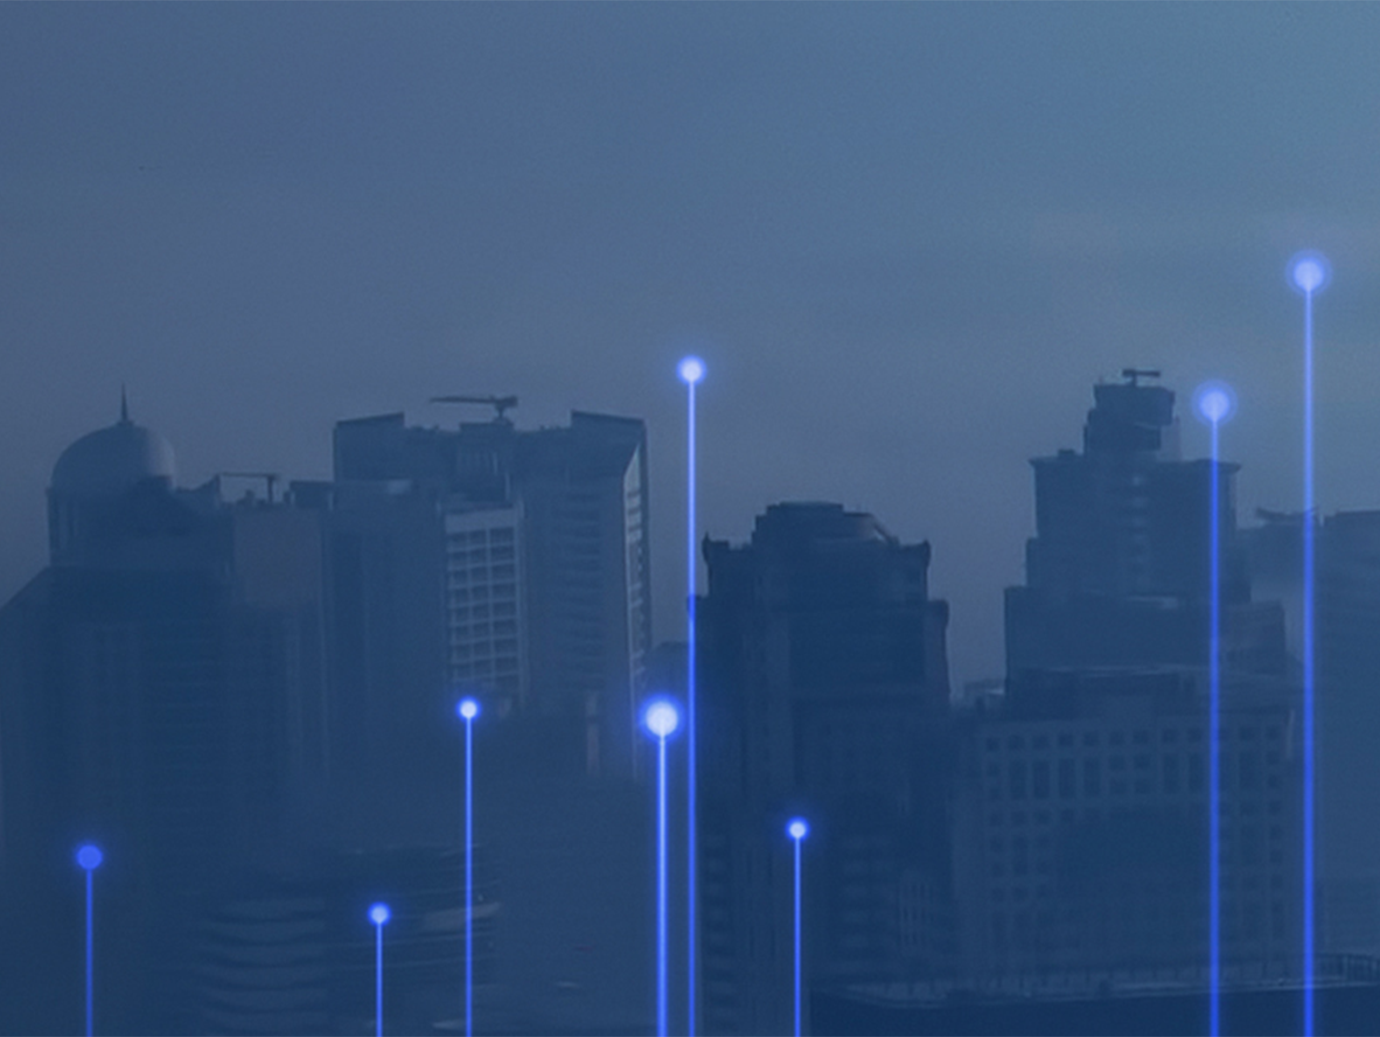 Buildings and skyscrapers cast in blue hues from fog. Data lines and dots are scattered throughout the landscape.